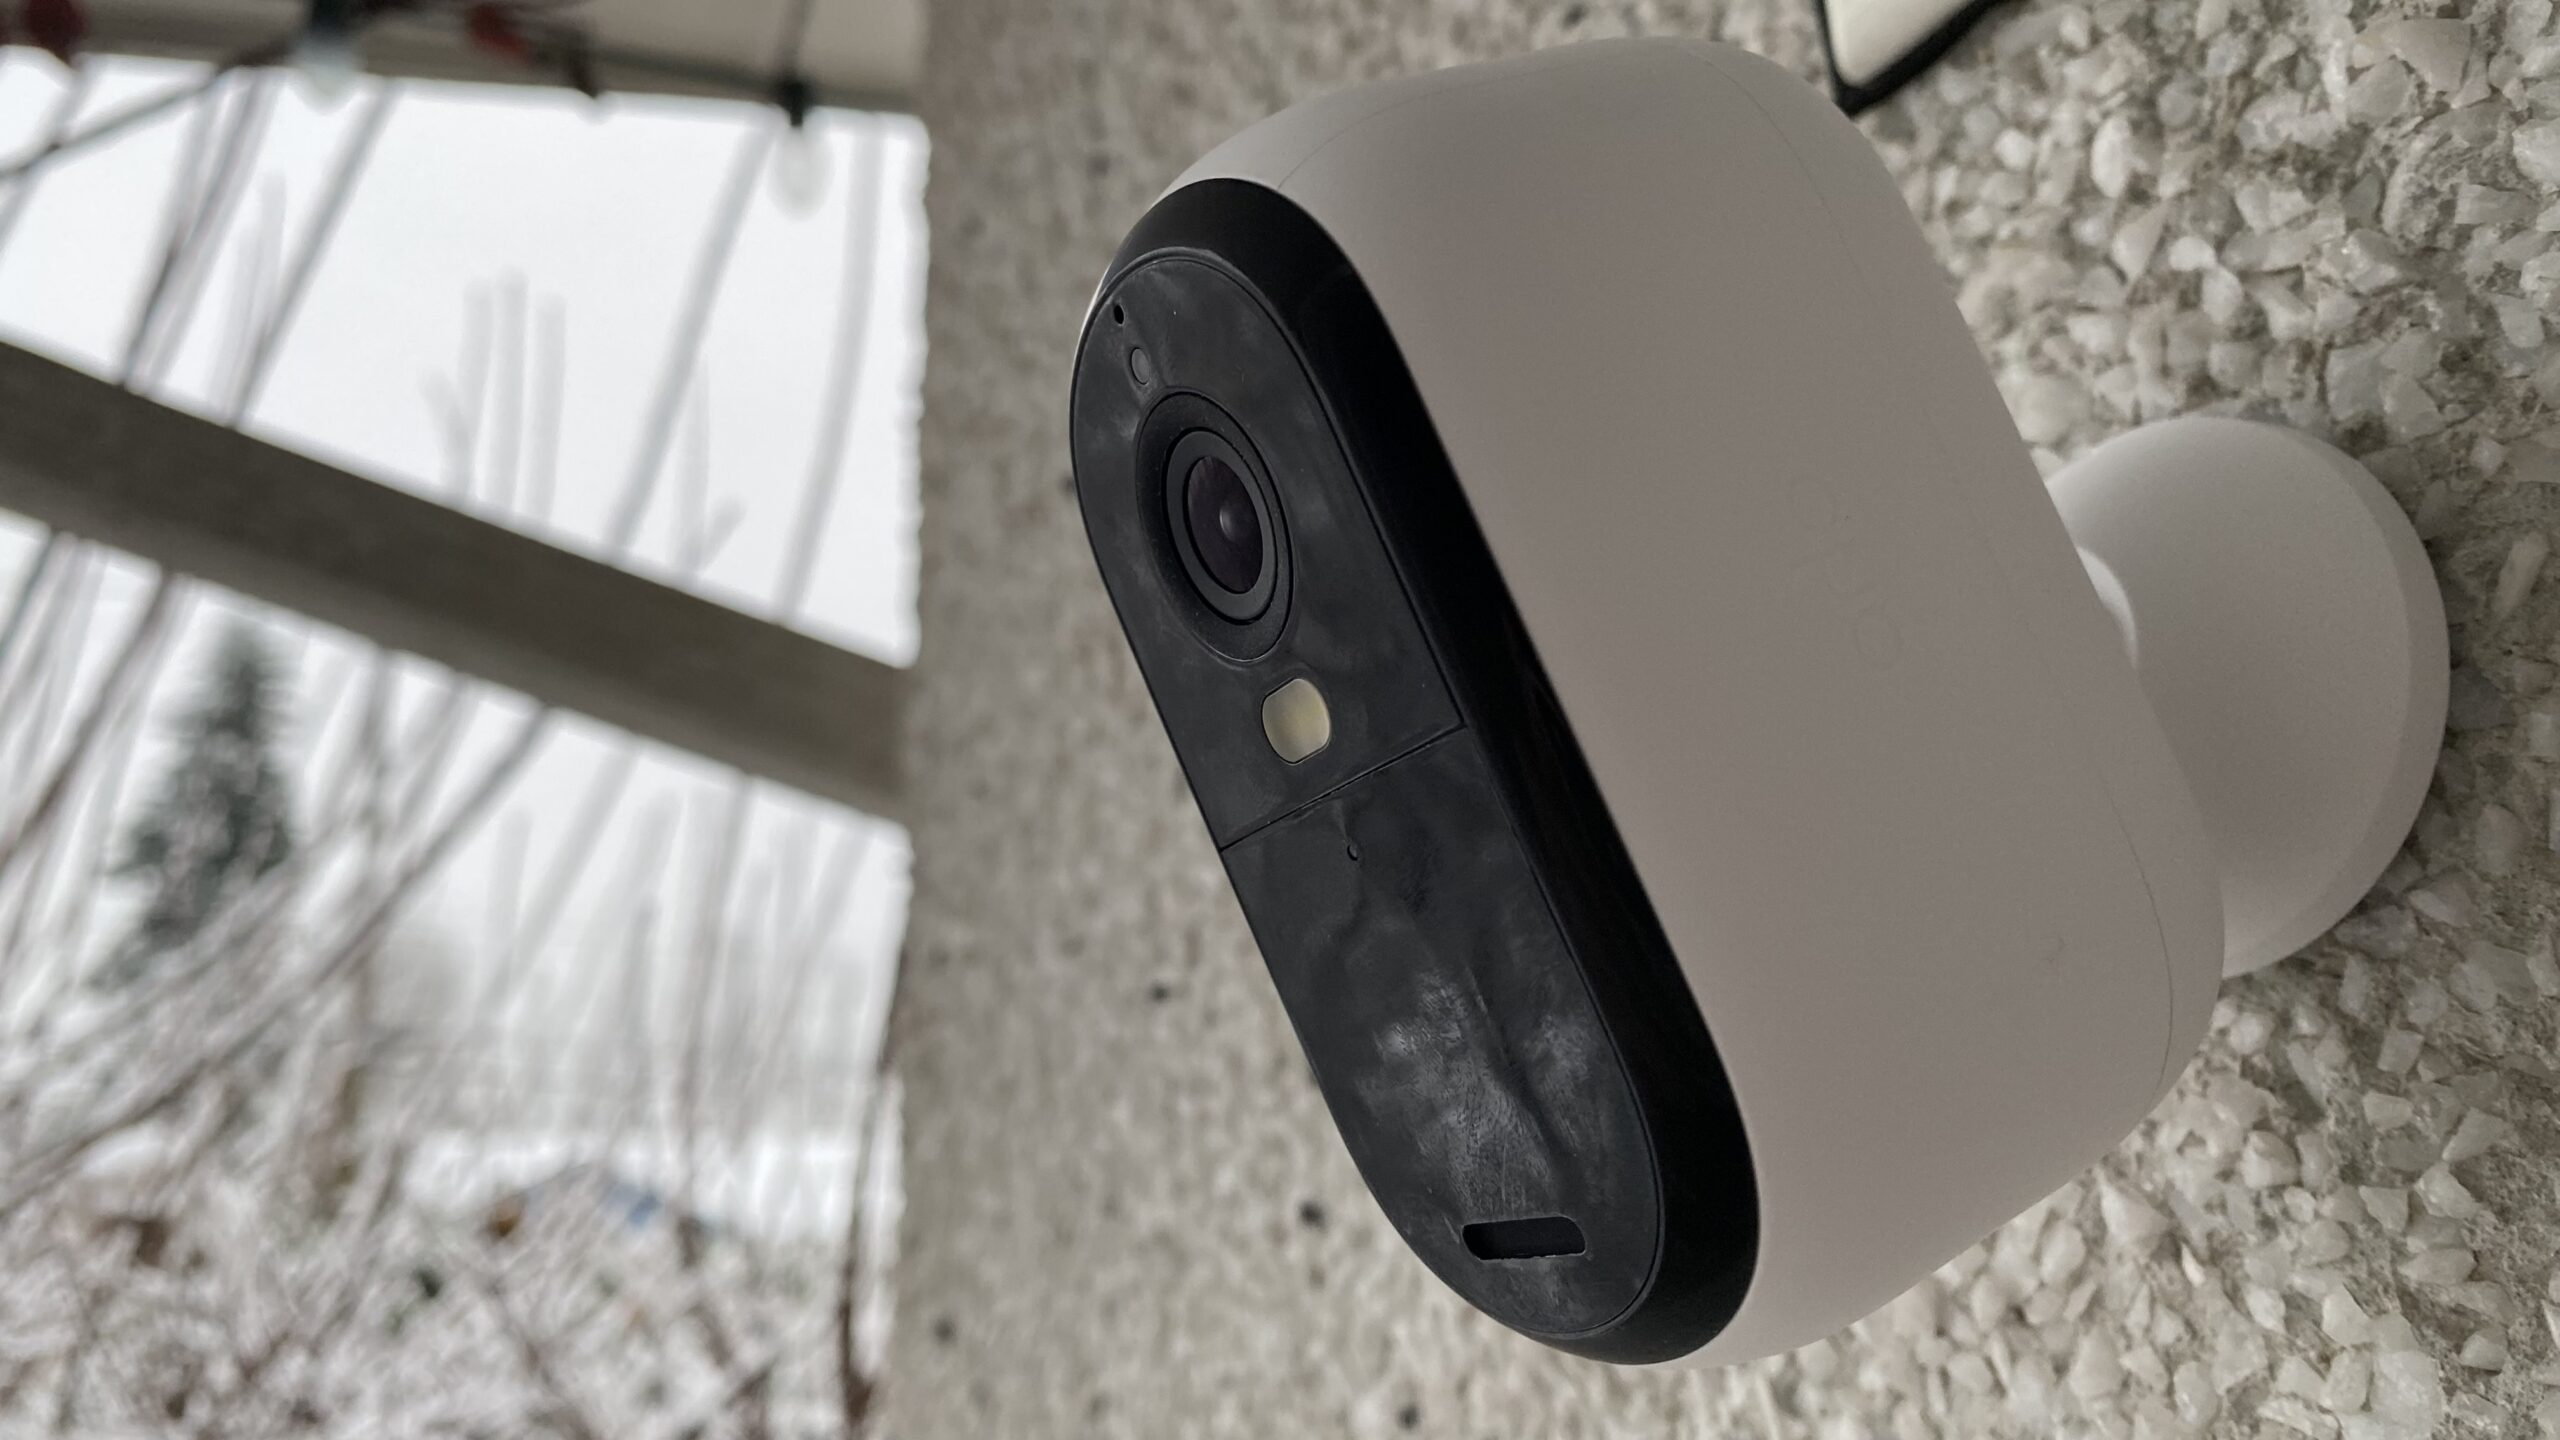 Arlo Essential Camera mounted on a wall outside the front of a house